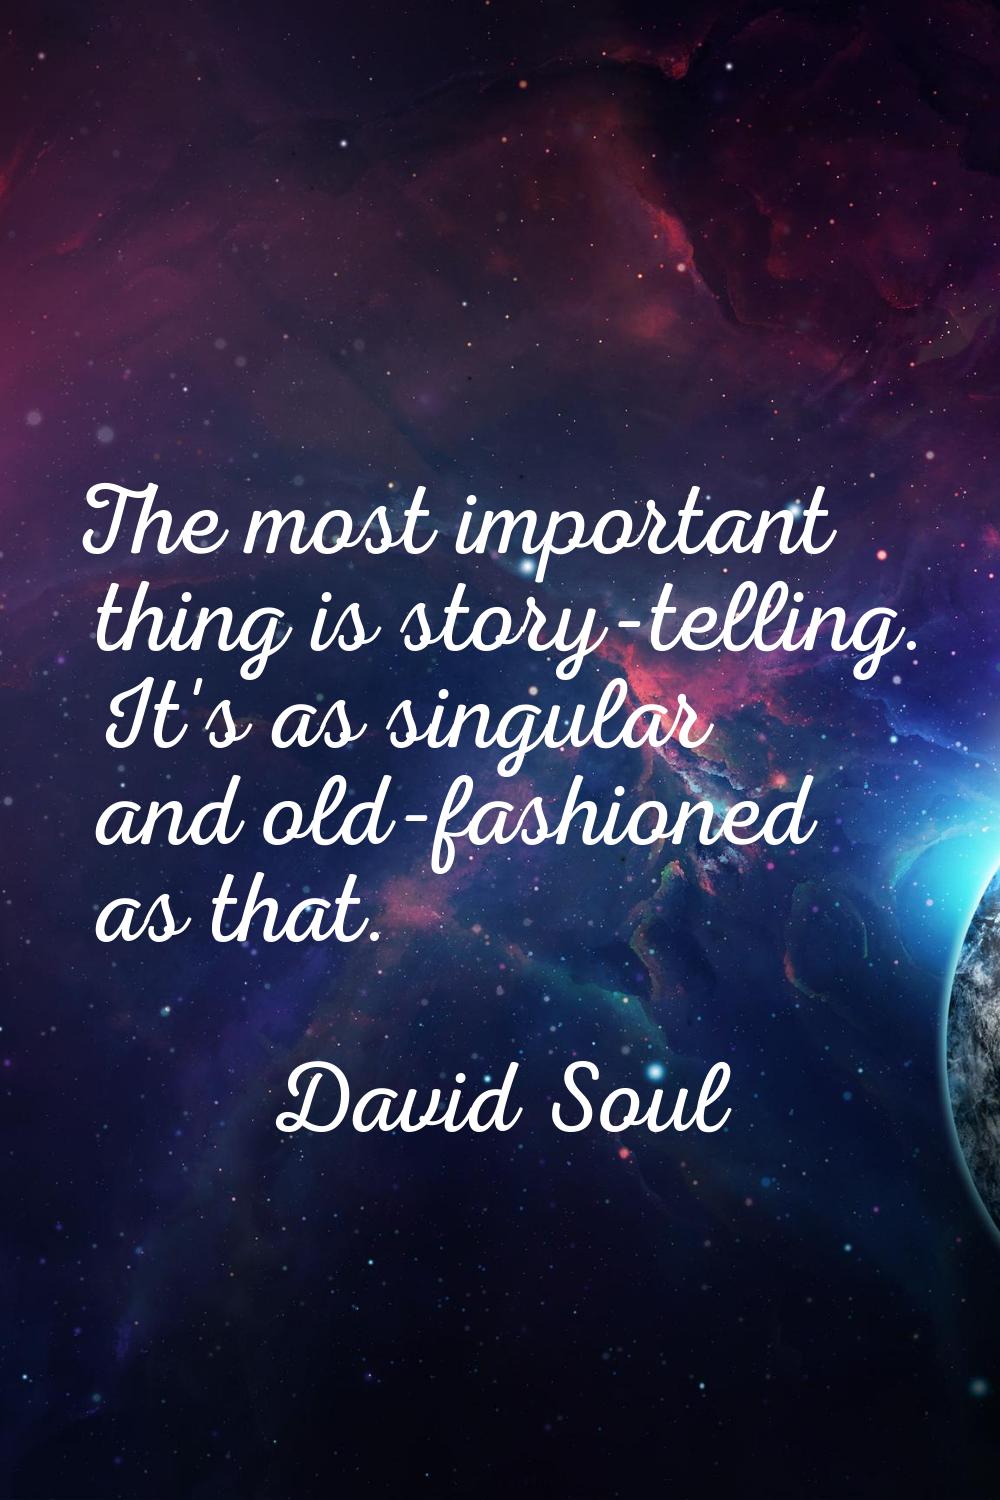 The most important thing is story-telling. It's as singular and old-fashioned as that.